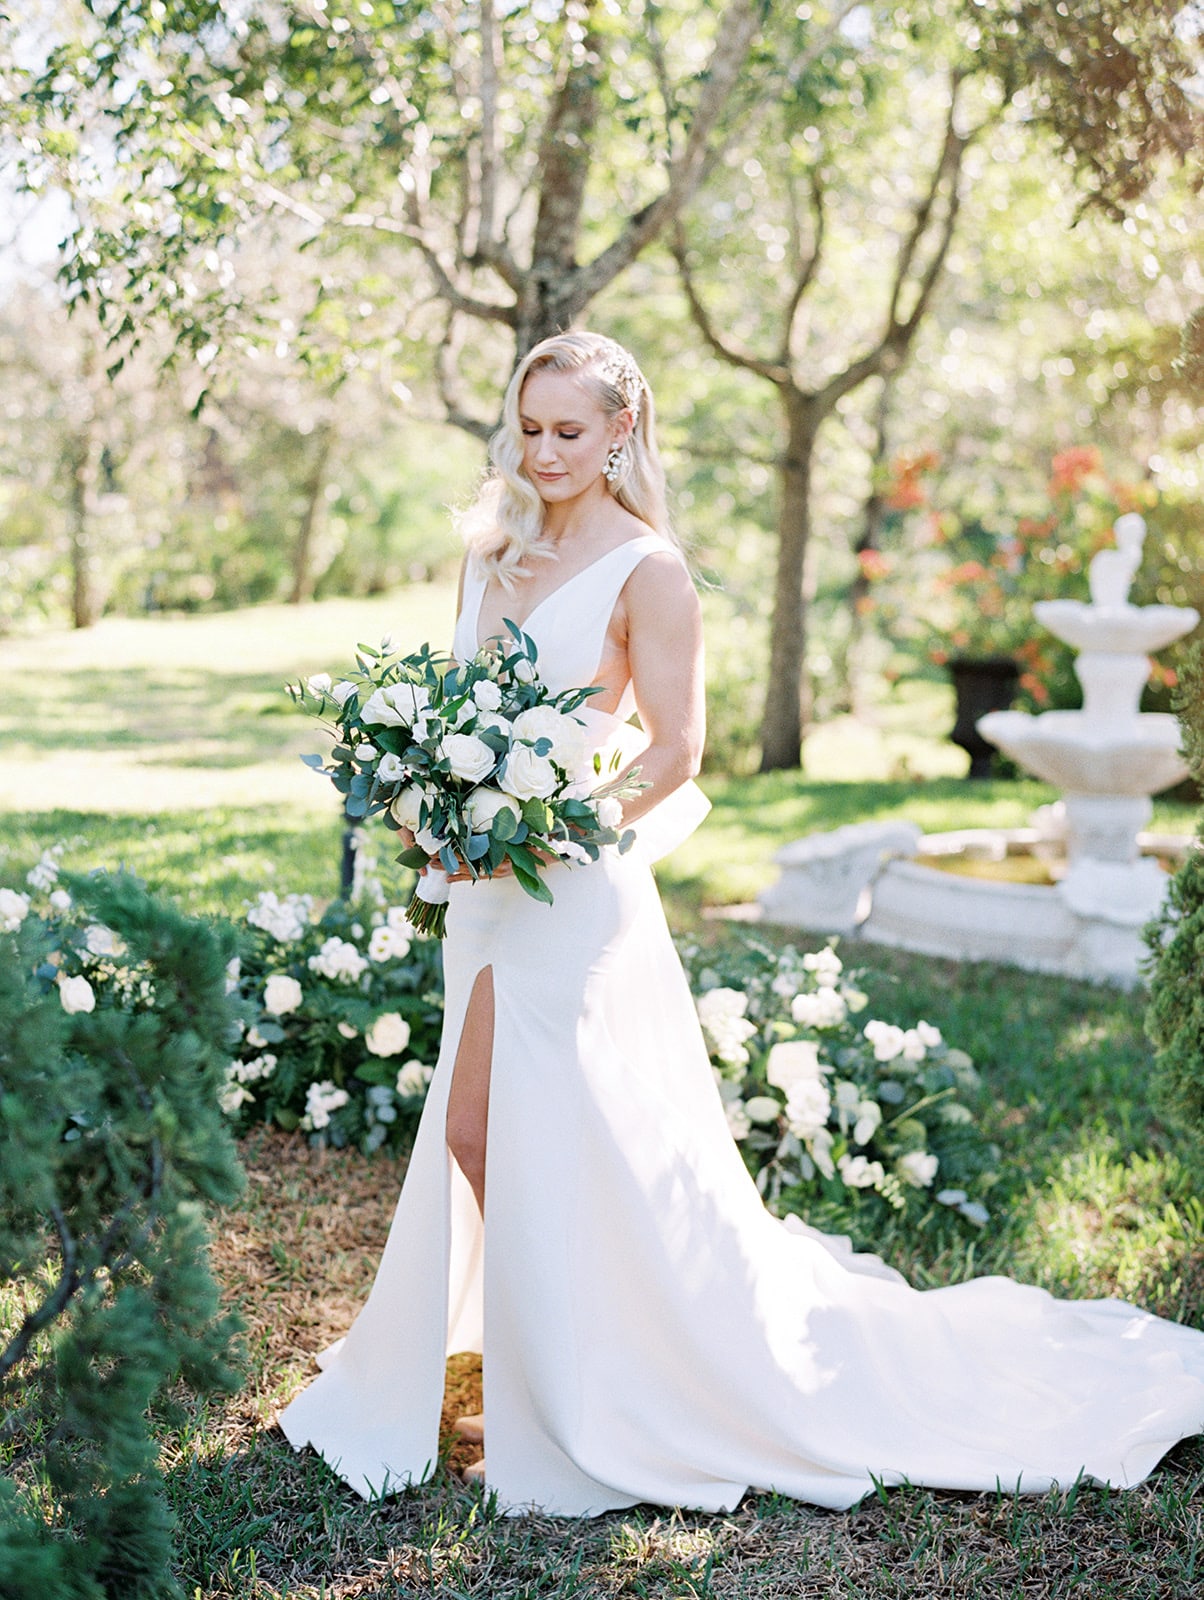 Bride in a garden holding a bouquet of white flowers. She is standing in front of a decorative fountain